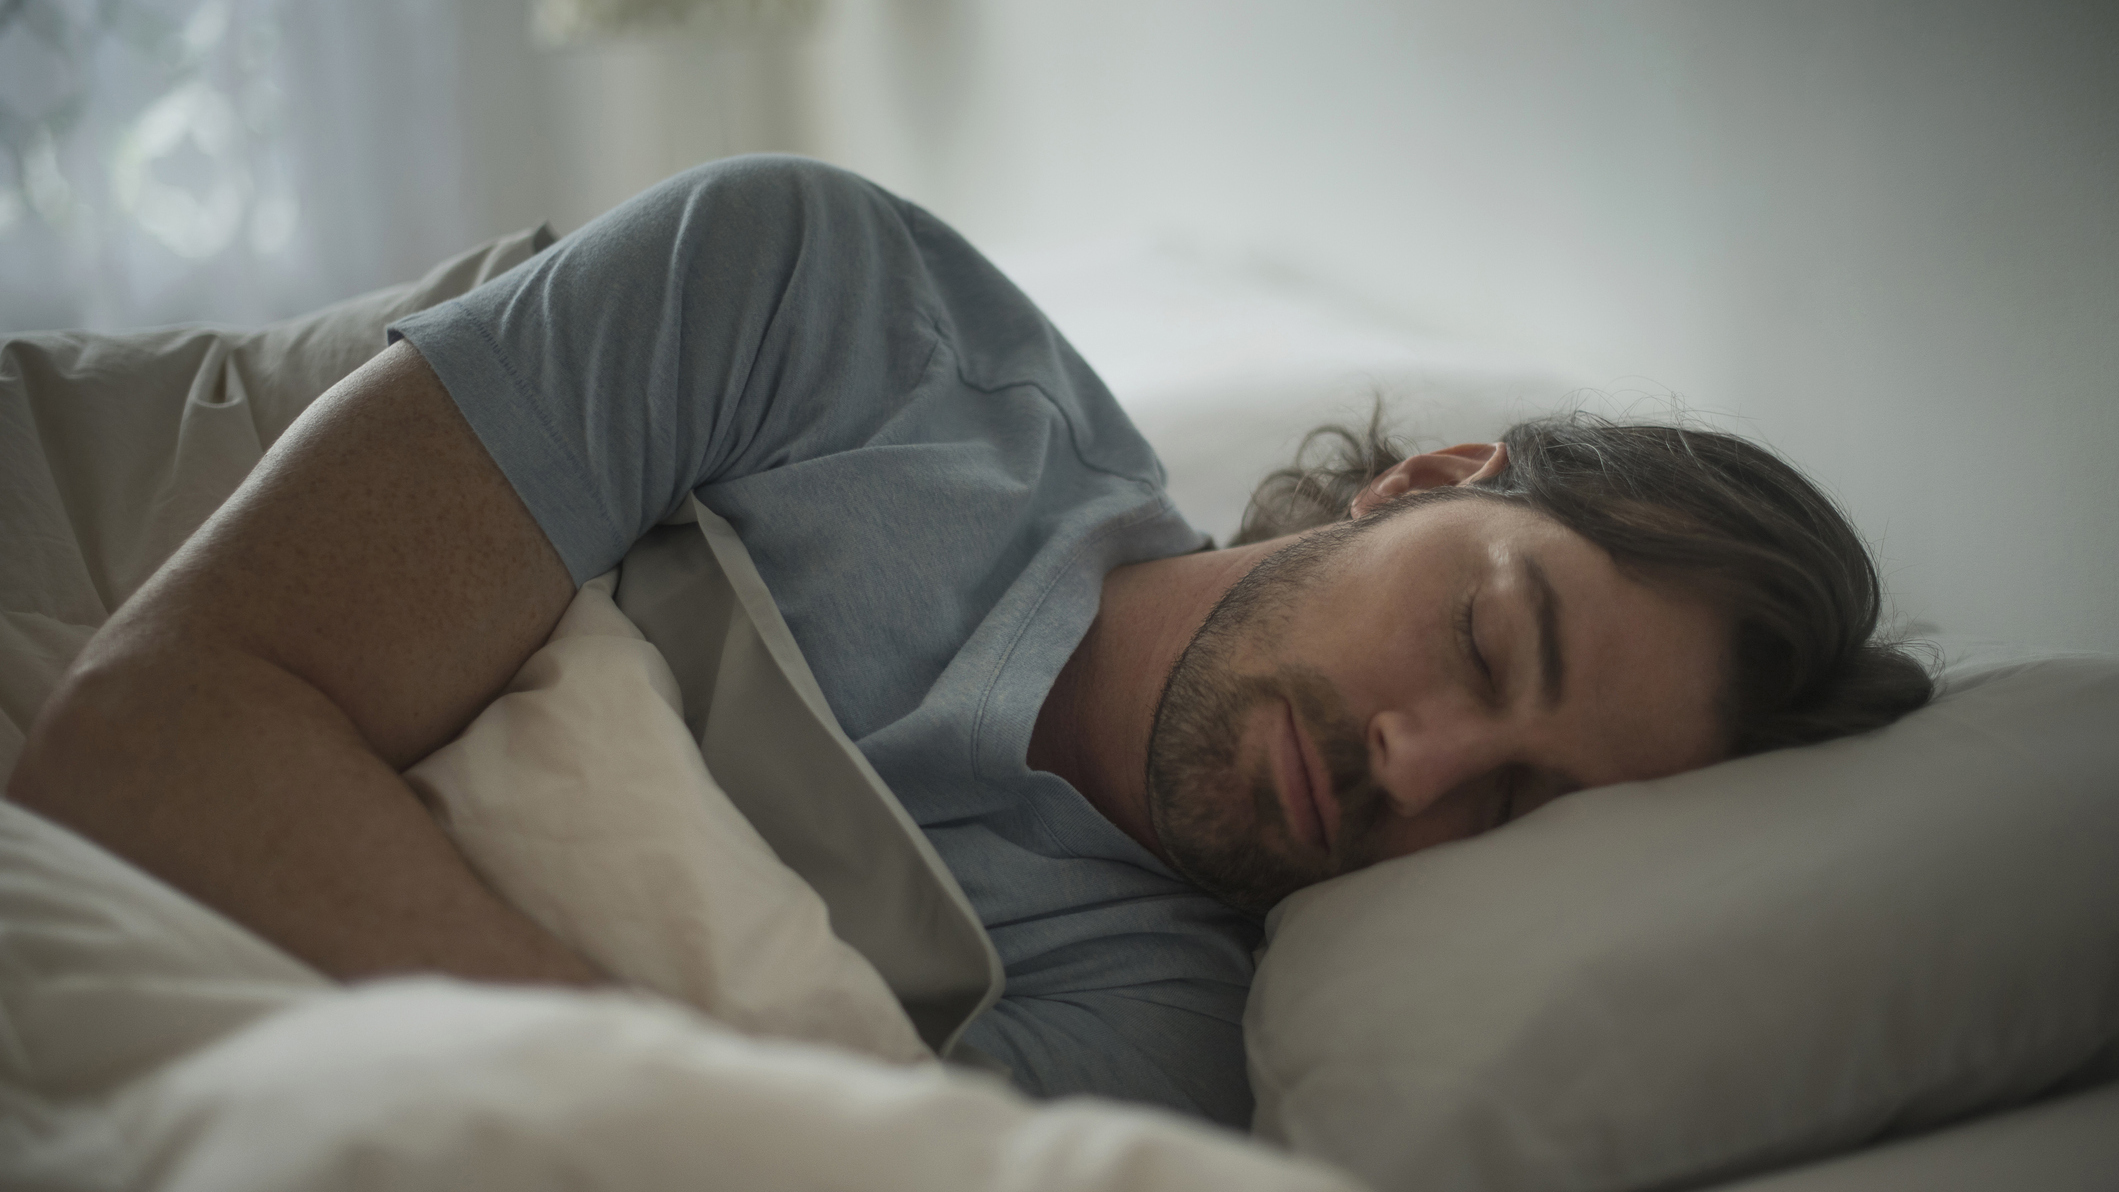 A man with long dark hair sleeps on his side in bed to reduce his chances of snoring